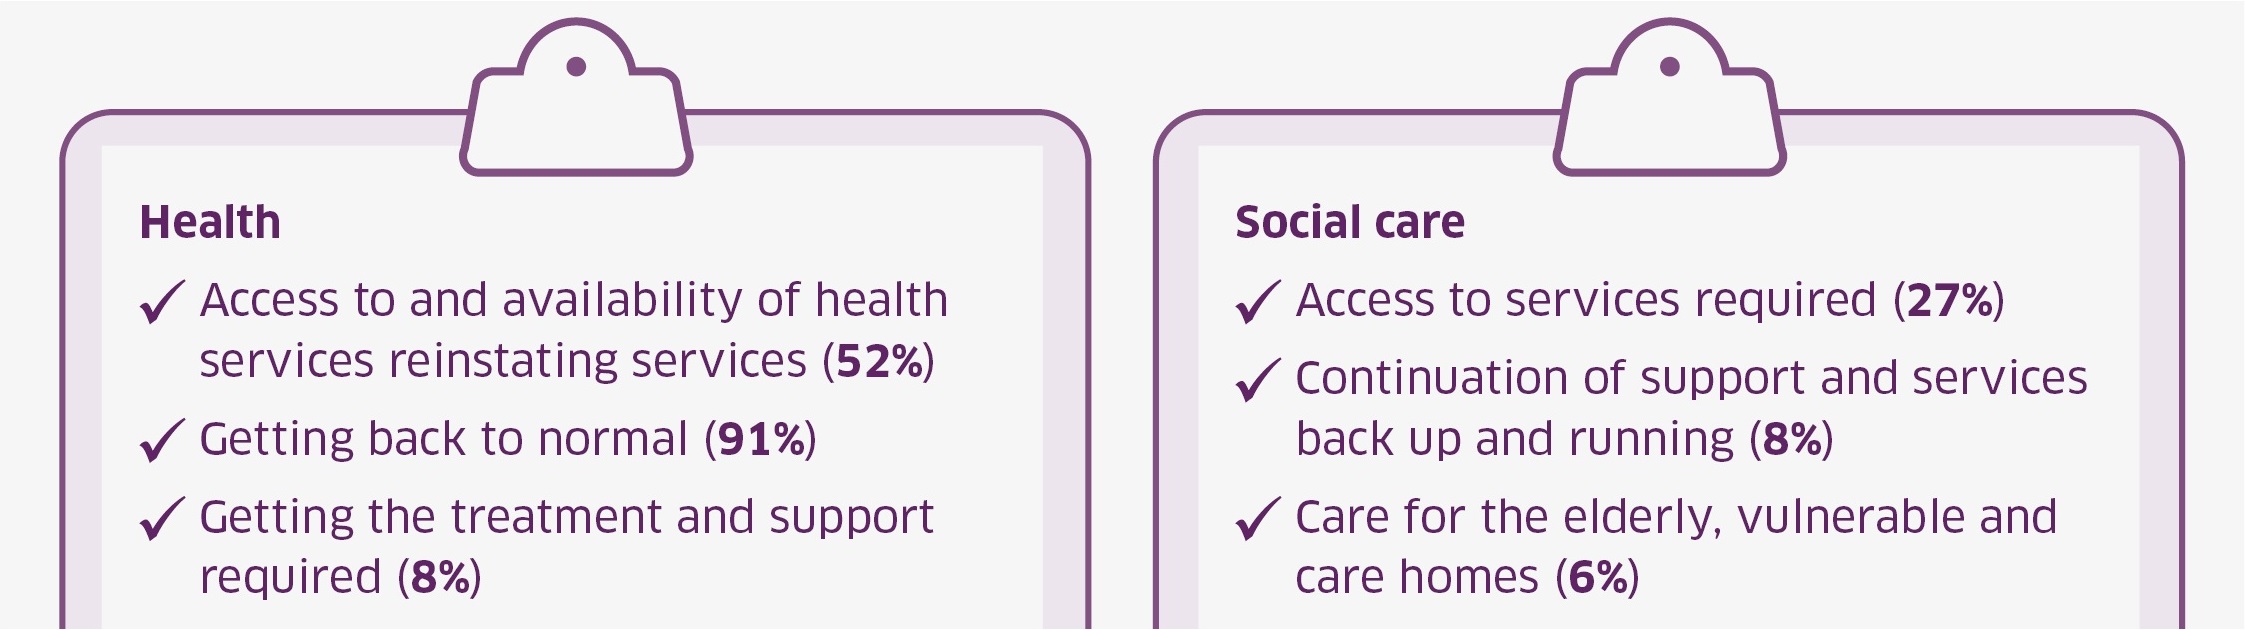 Priorities for health and social care services over the next 12 months